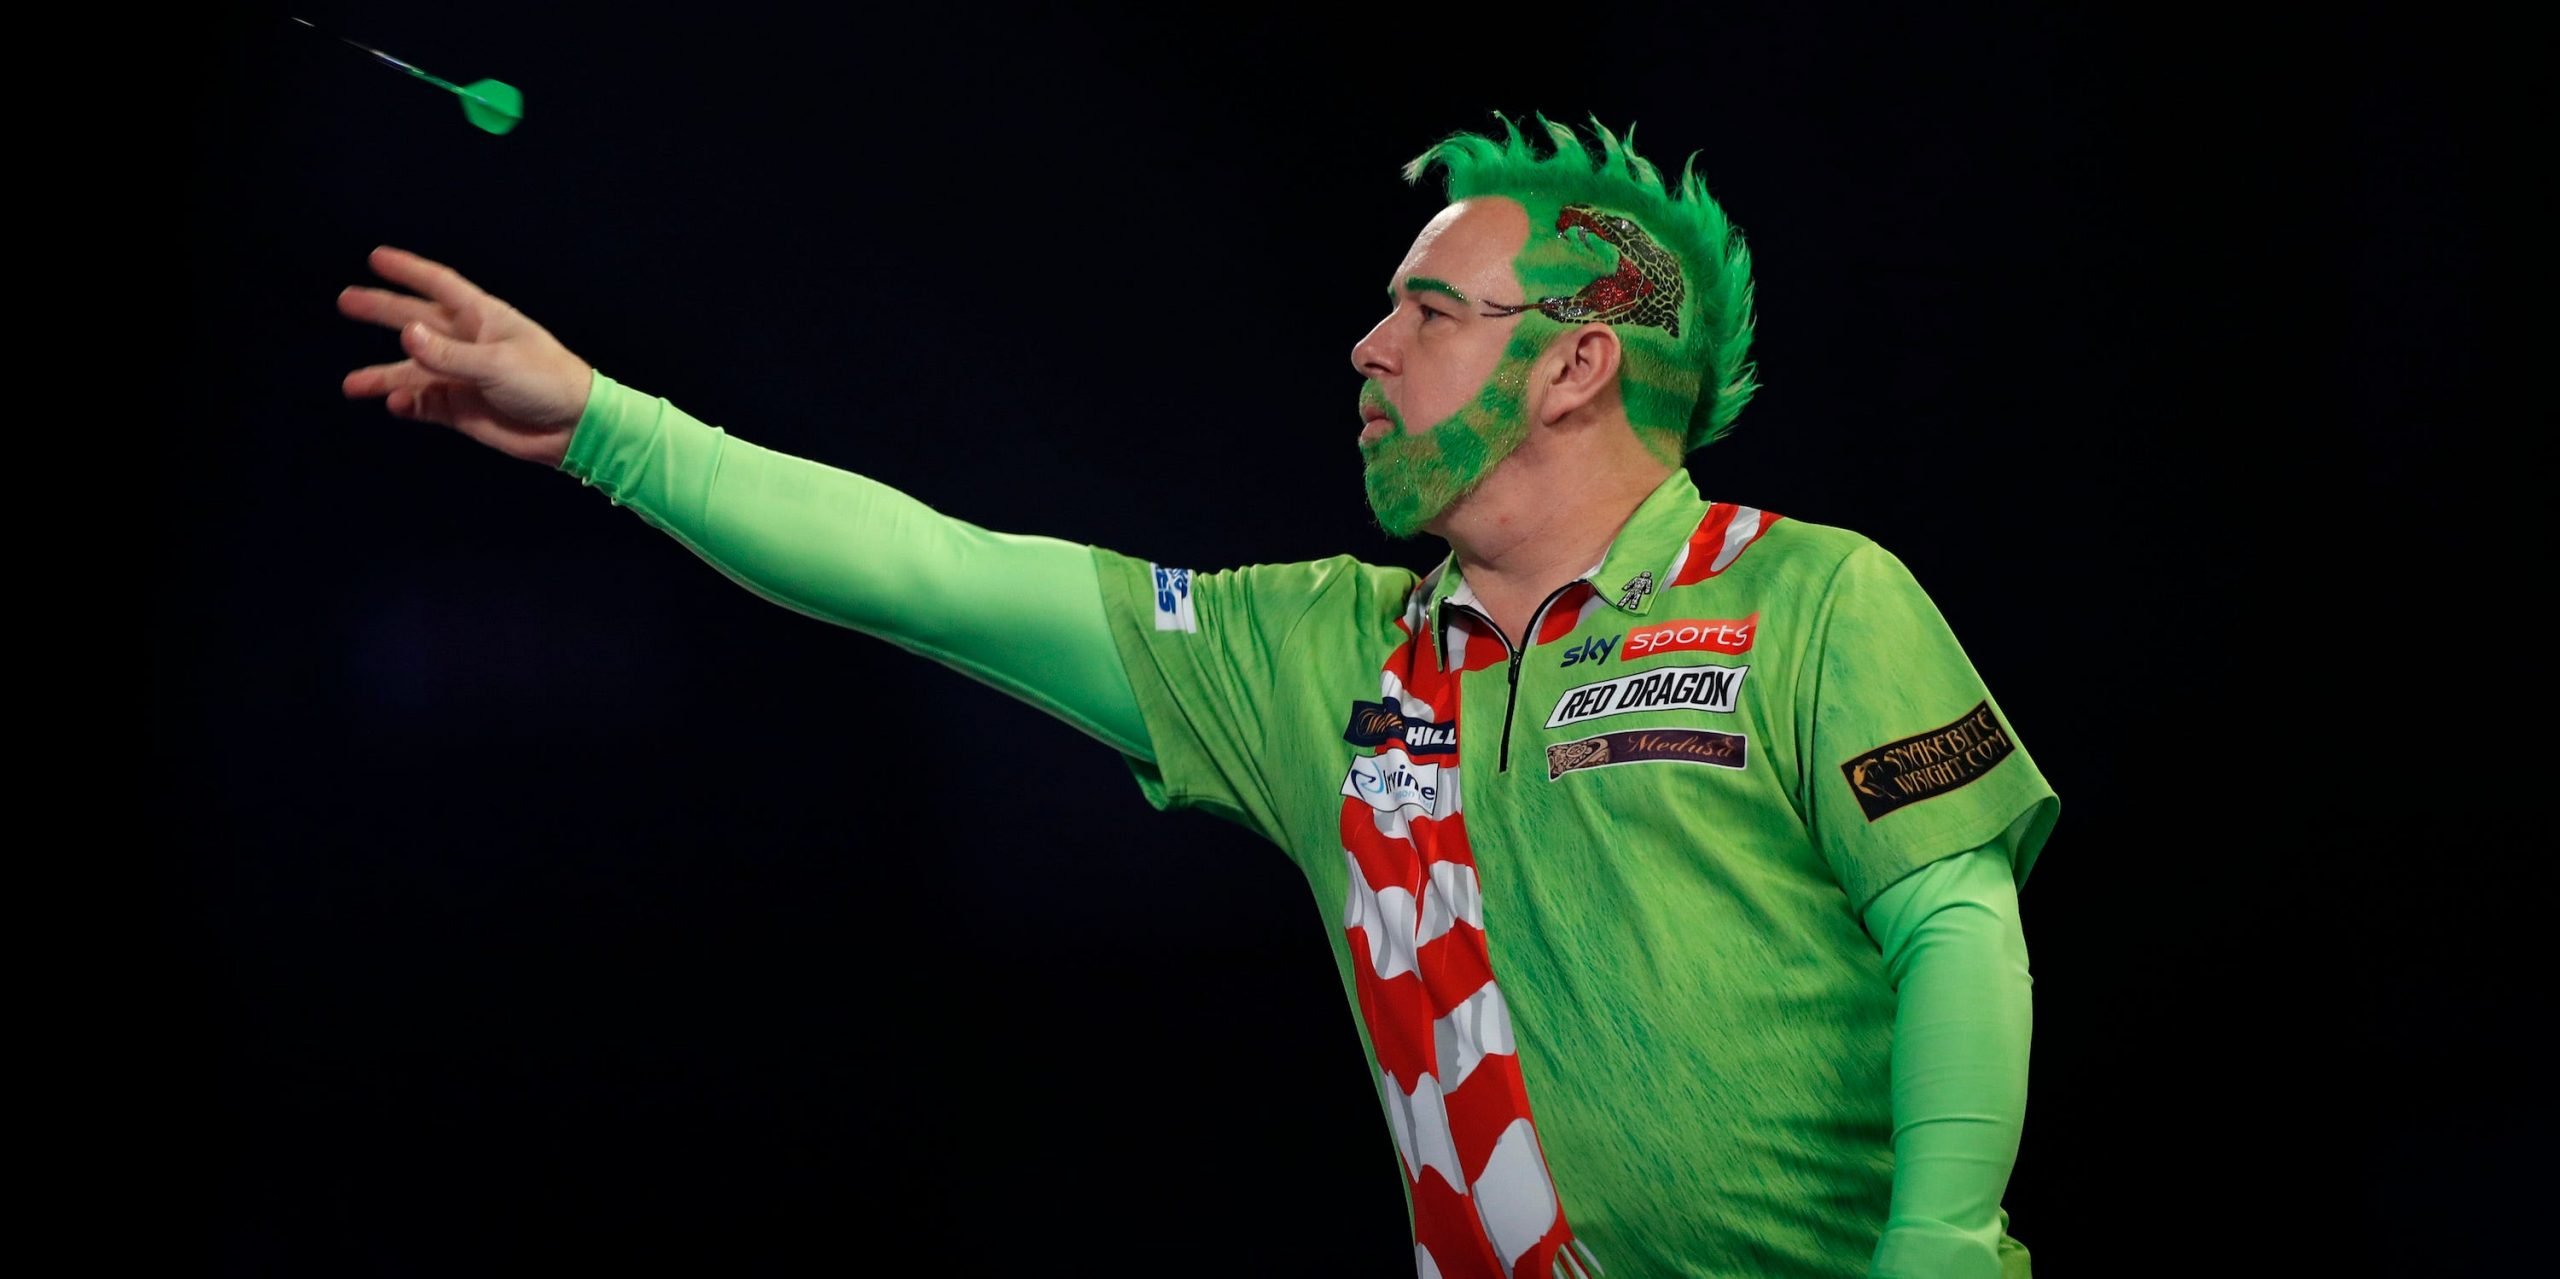 The world darts champion dyed his eyebrows bright green and dressed up